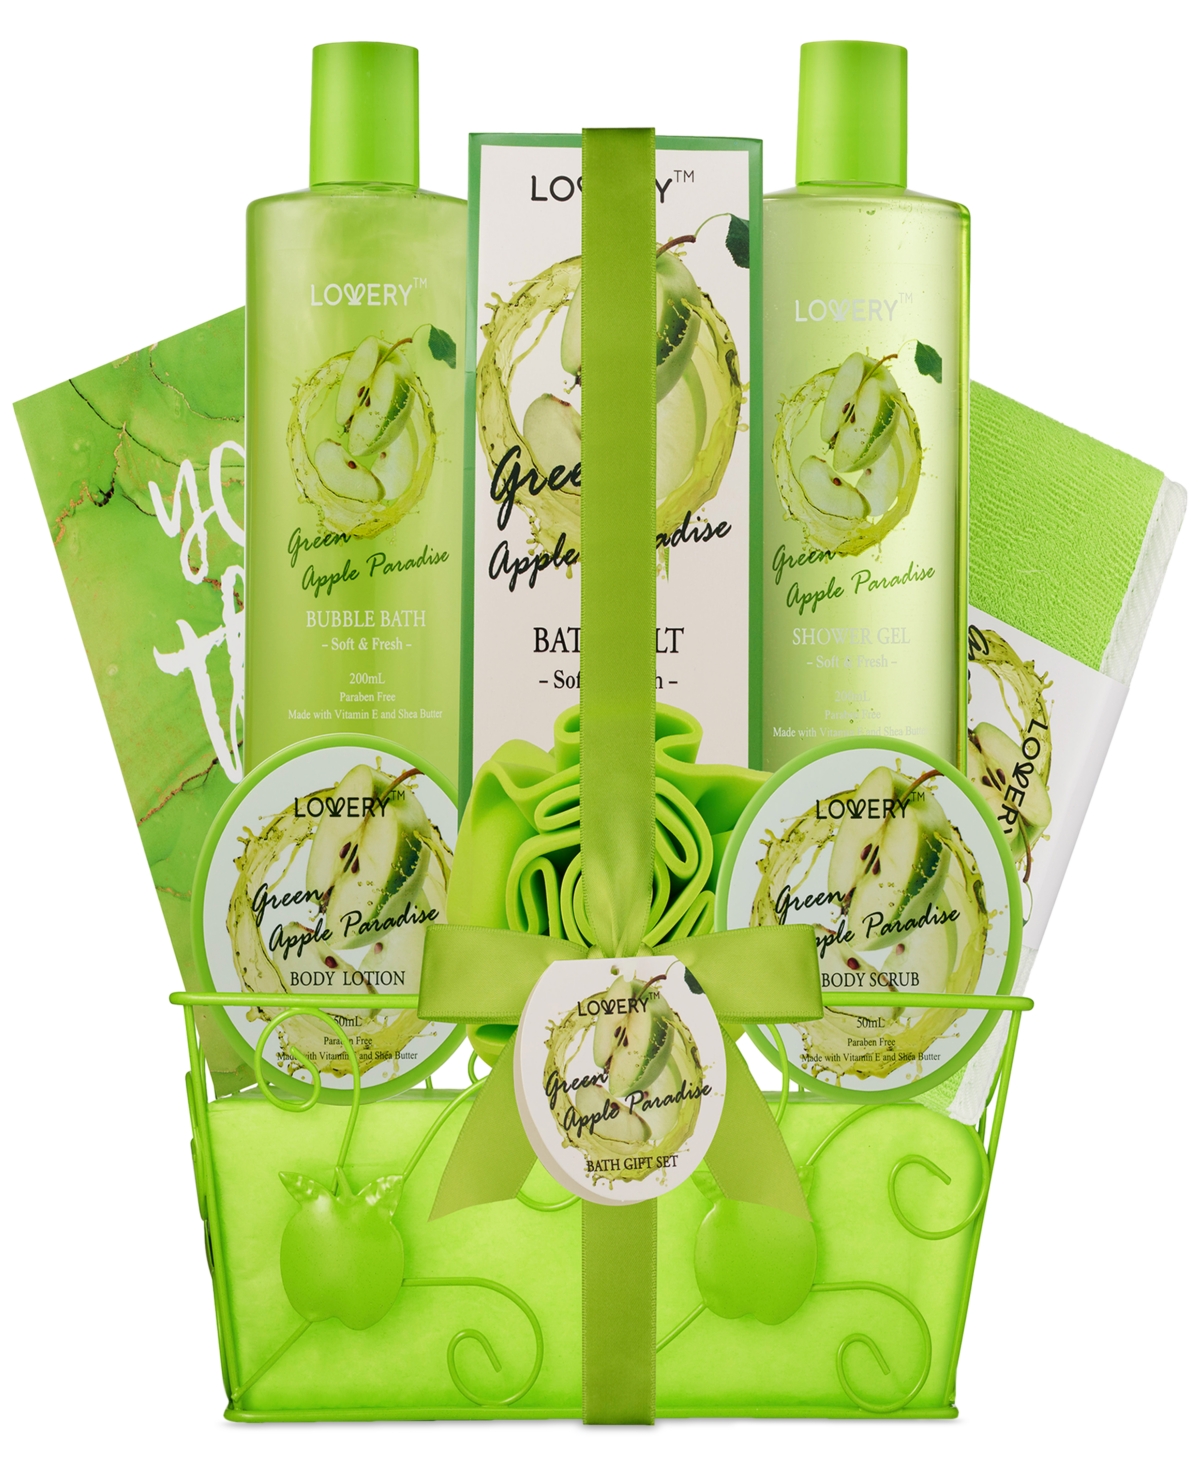 Lovery 9-pc. Green Apple Paradise Body Care Gift Set